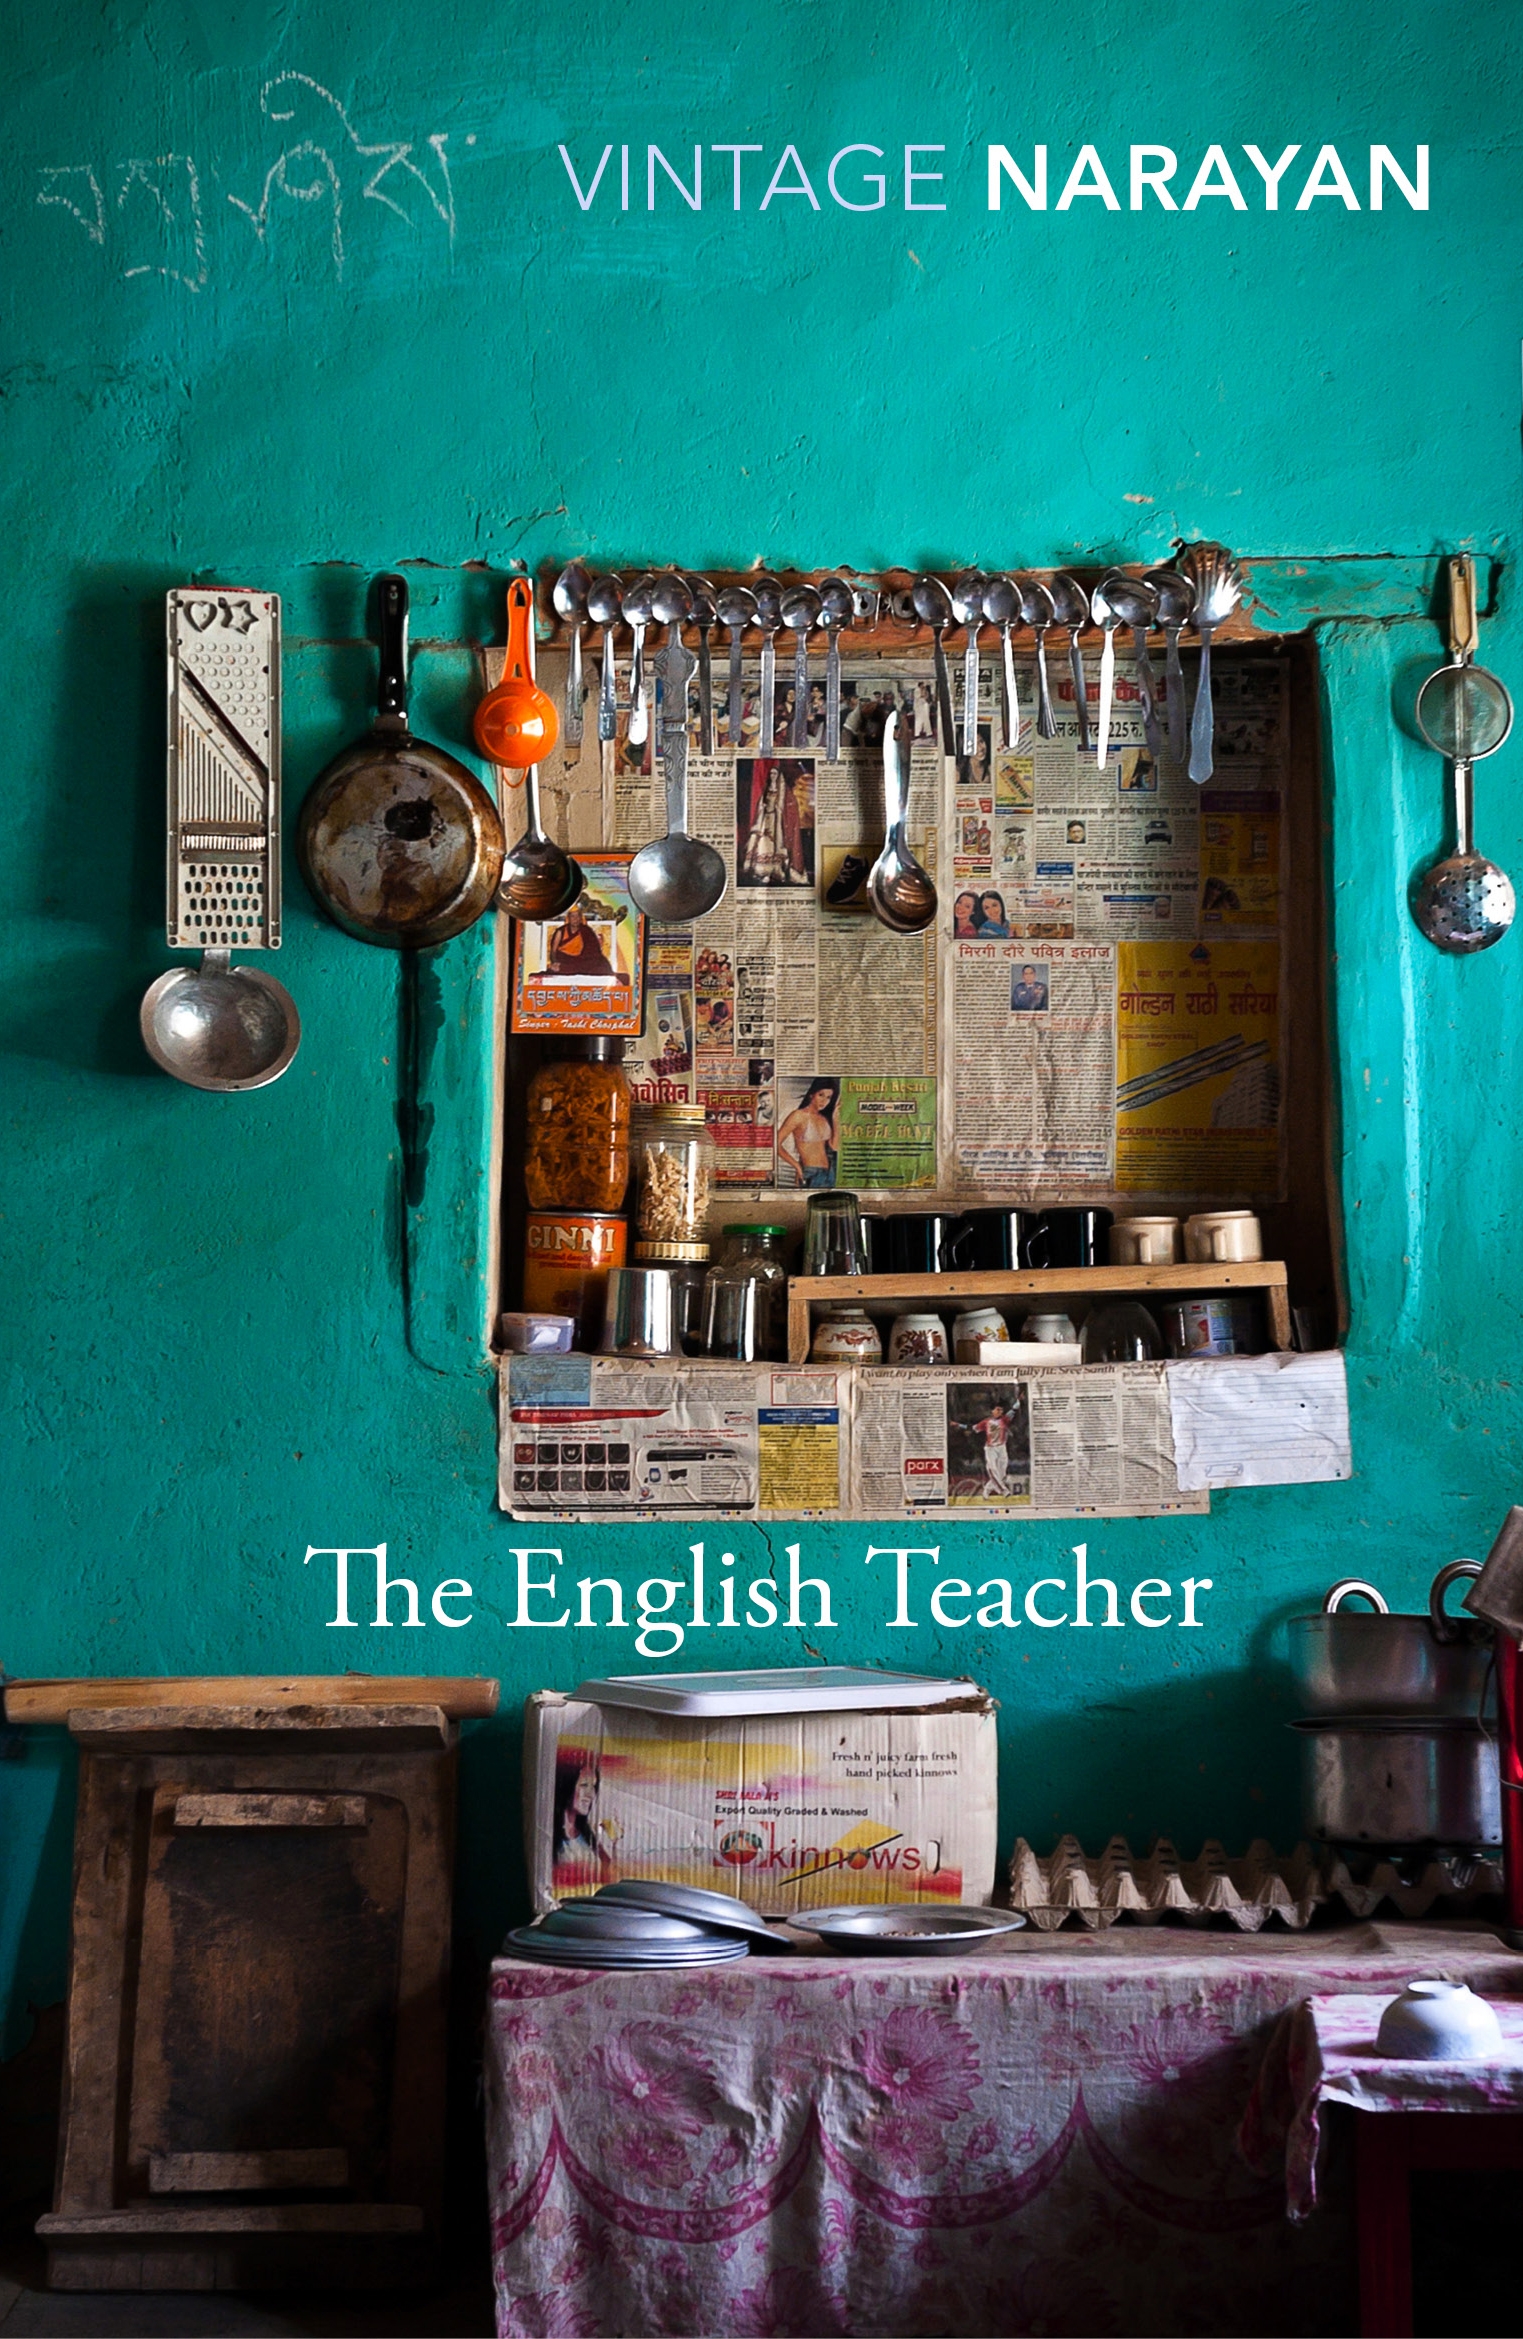 book review of the english teacher